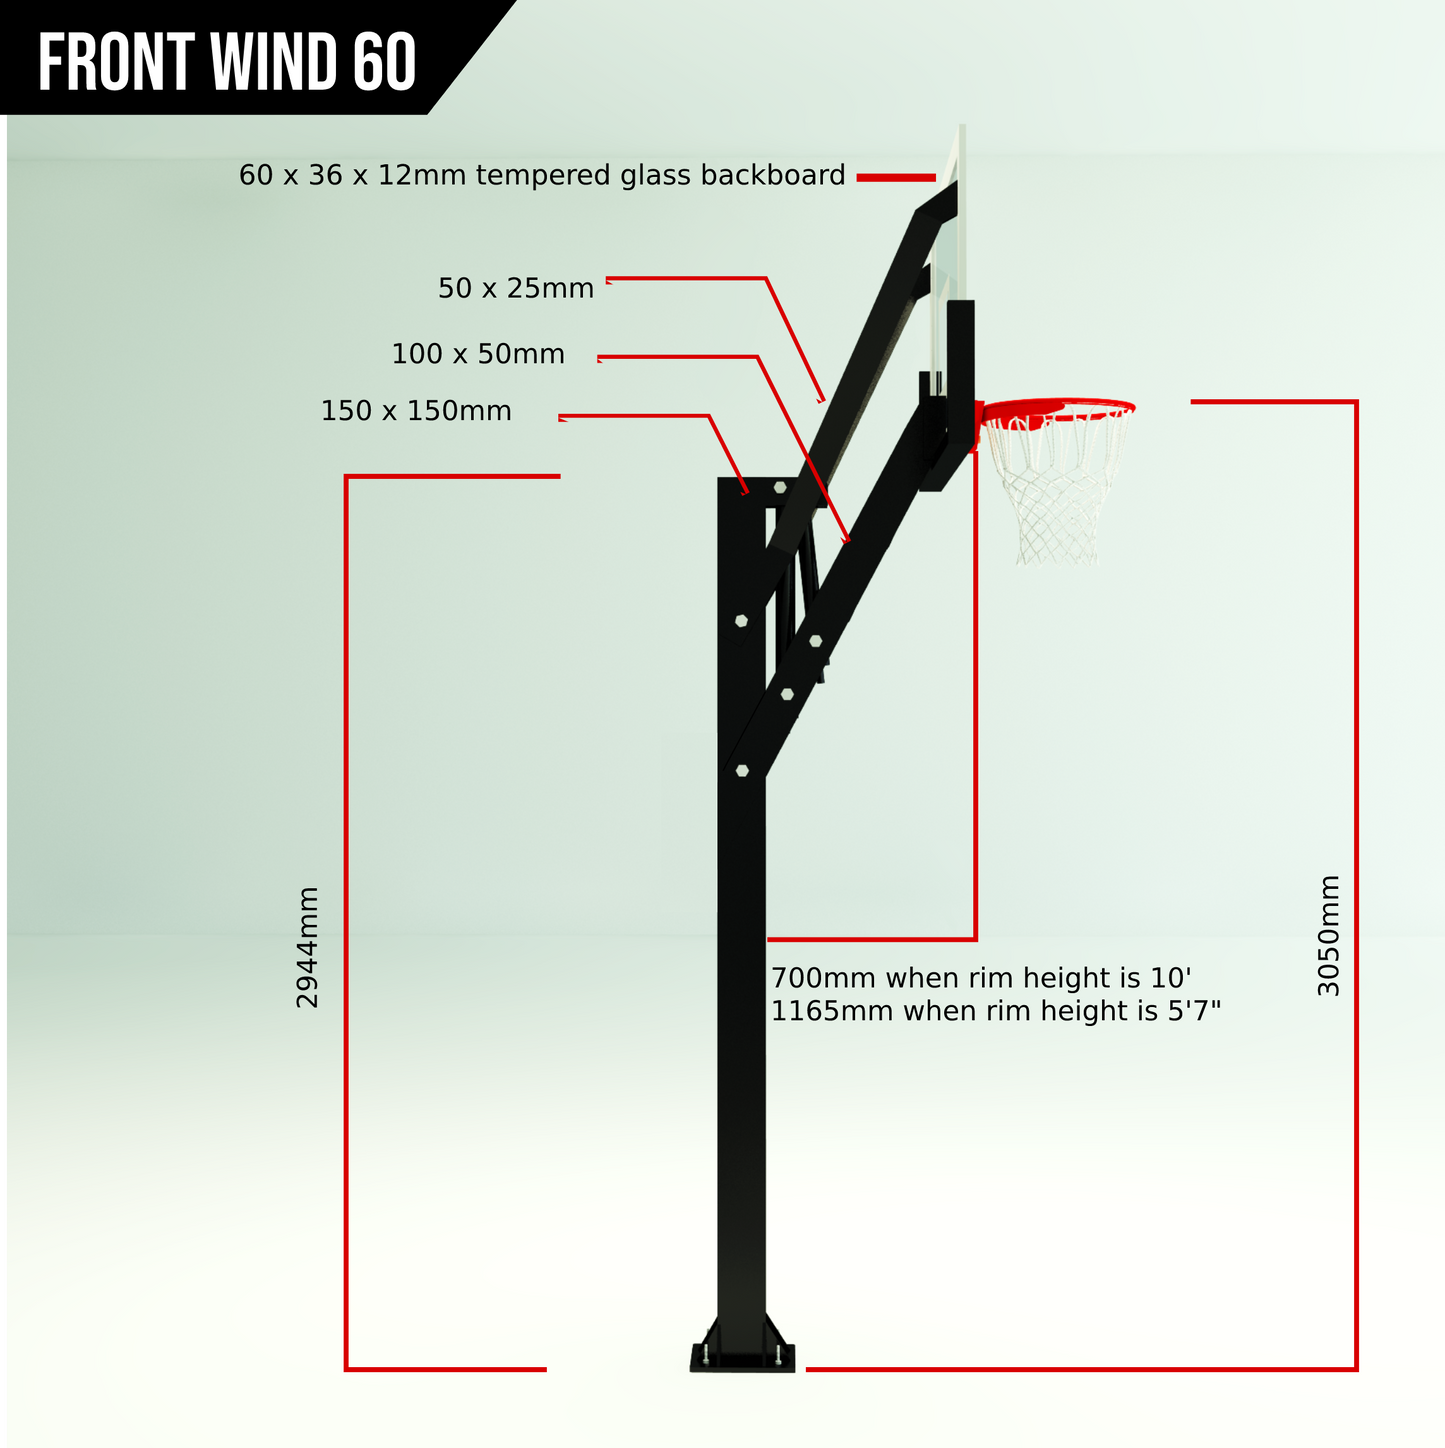 Boomer 60" (front wind)